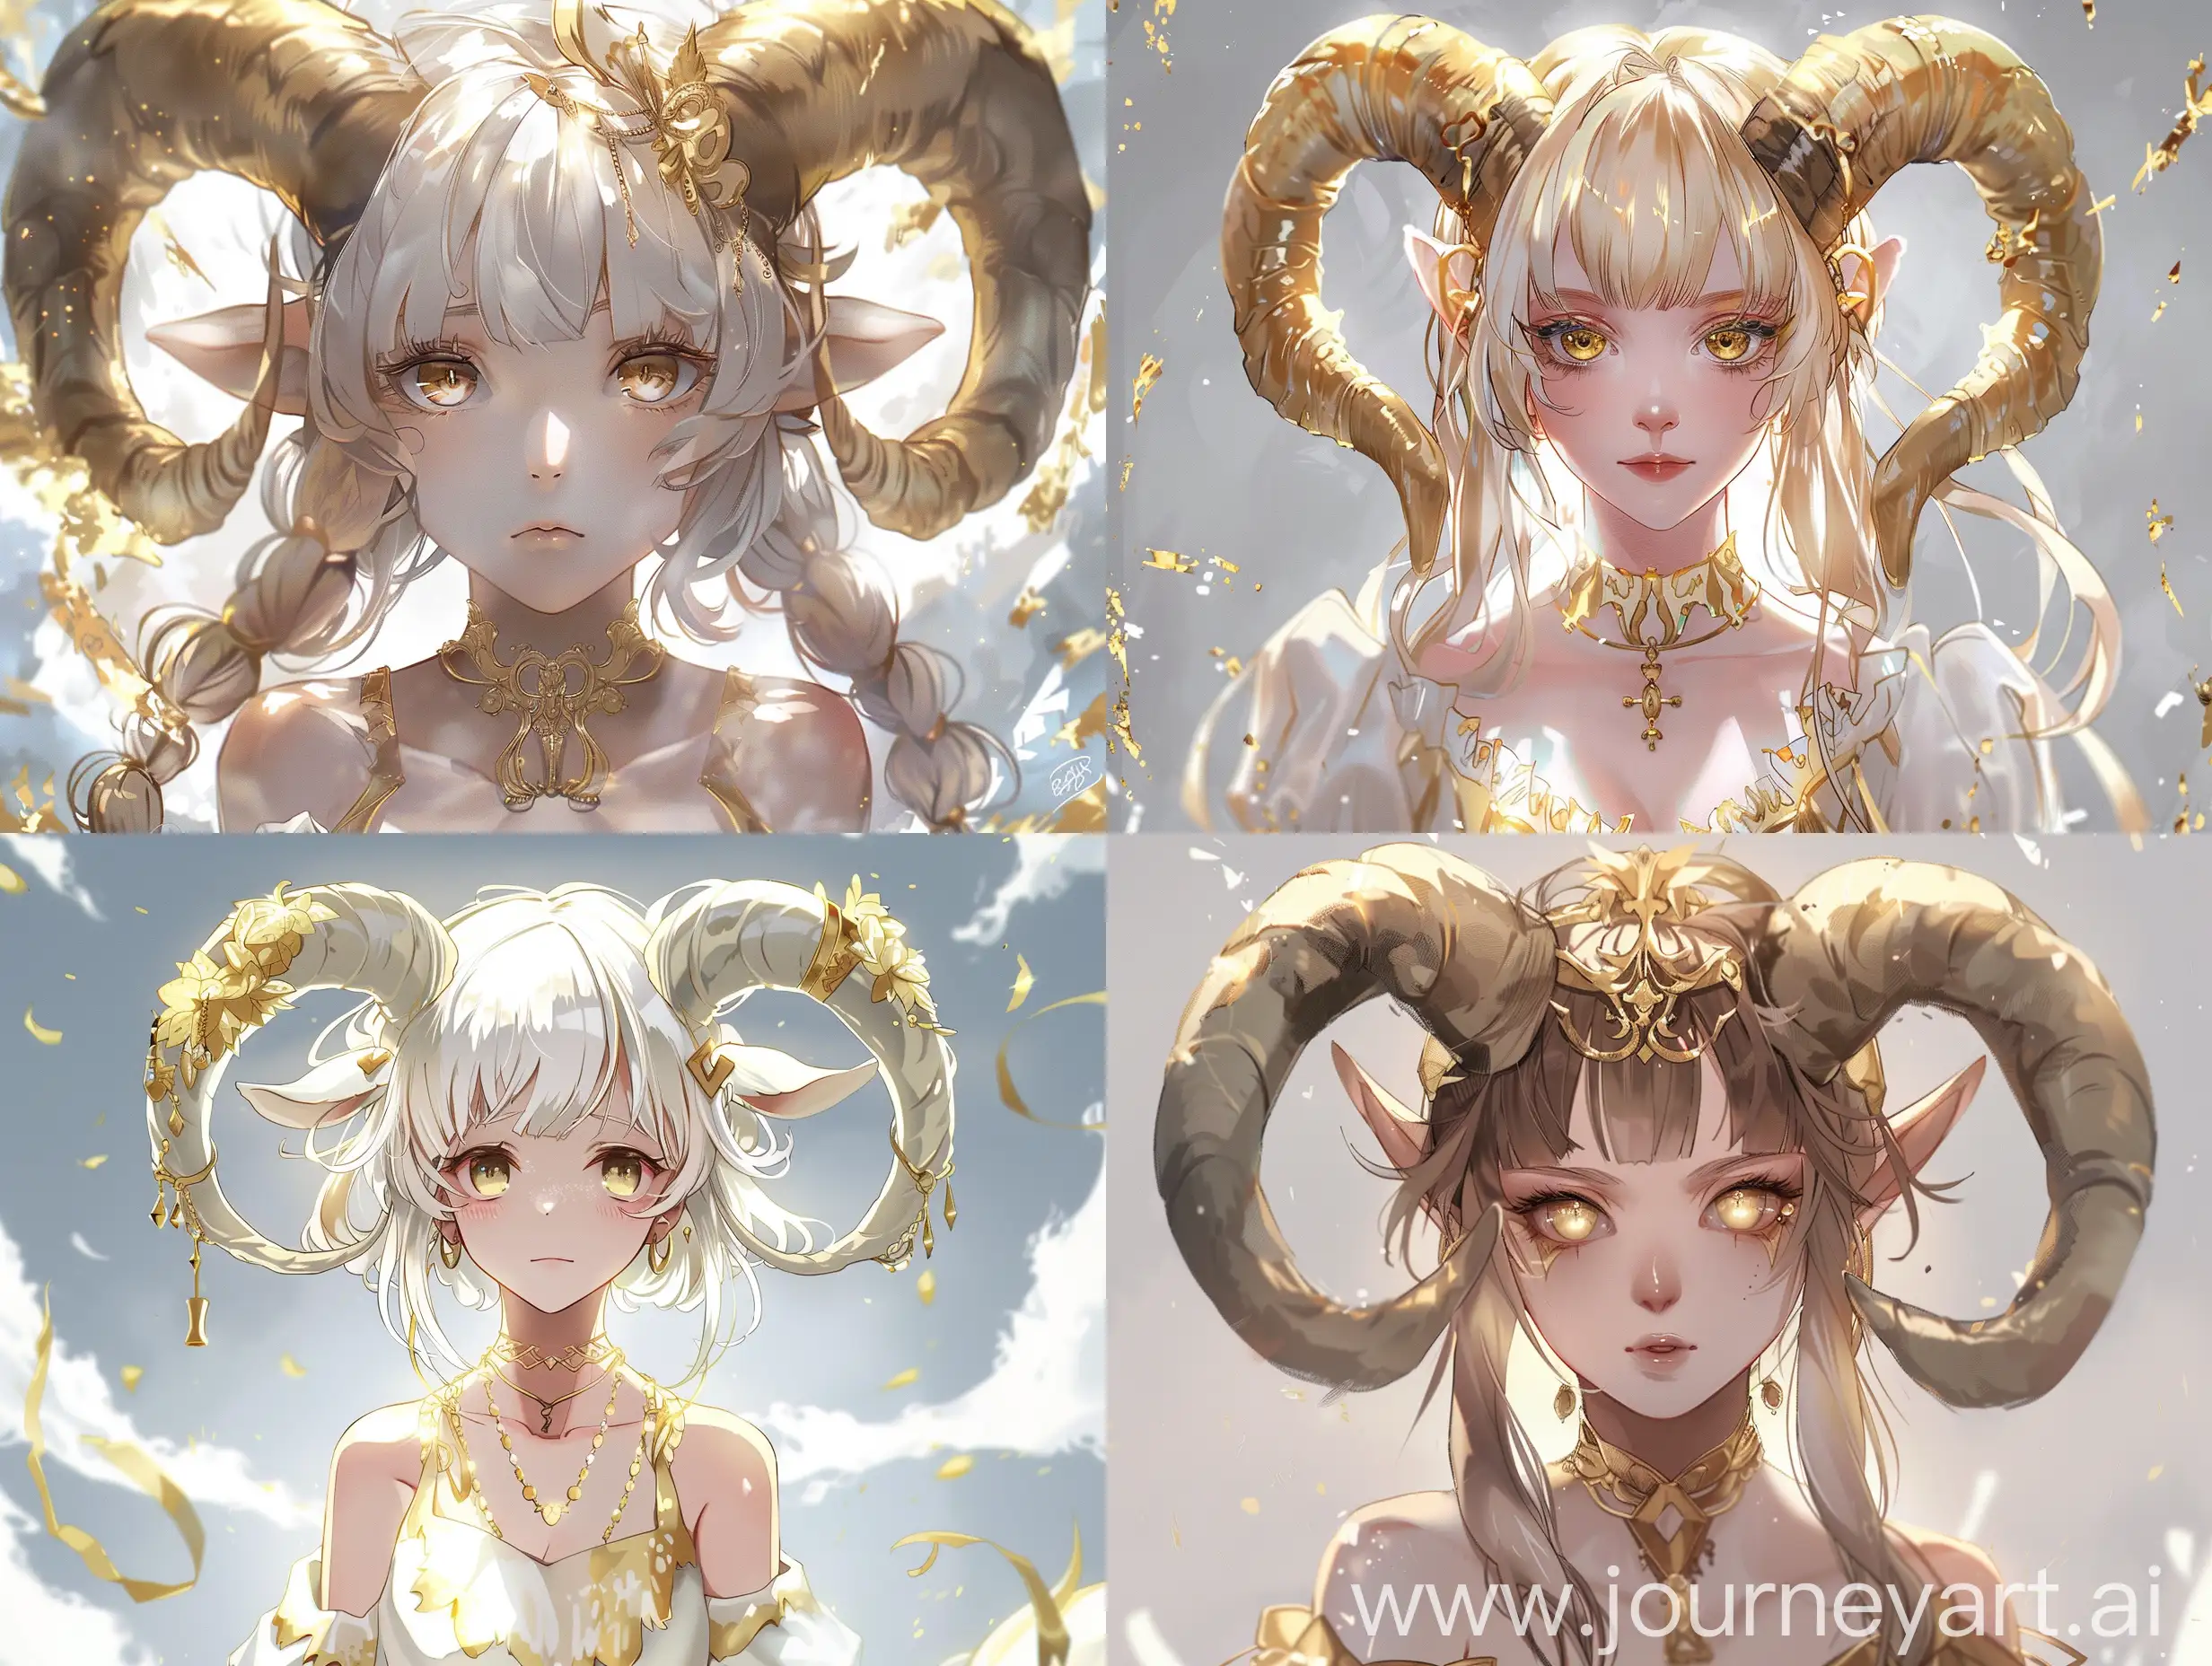 Anime, 1 girl, humanization of a goat, good hair, gold elements, two horns, best quality, gold and white elements